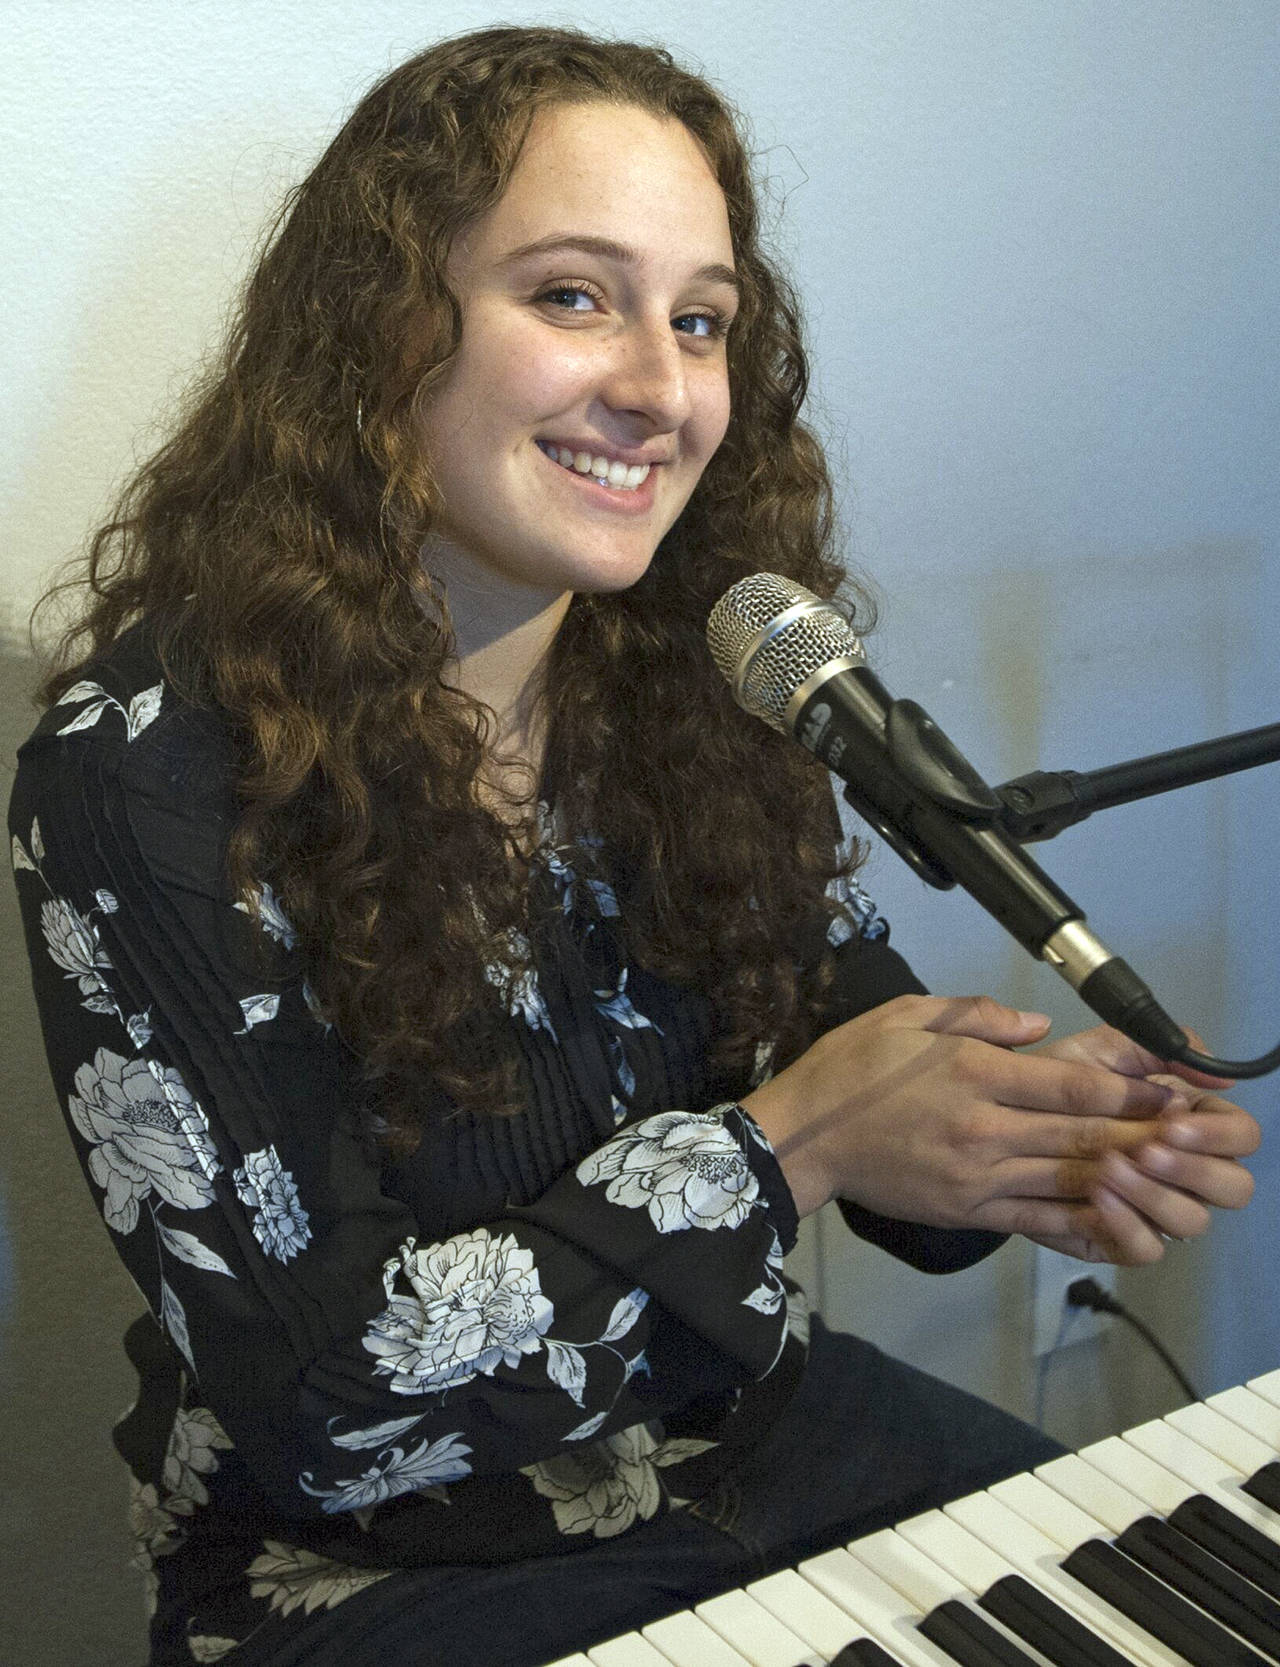 Courtesy photo                                2019 music scholarship recipient Amanda Ransom, an 18-year-old vocalist and pianist, will perform at Musical on Saturday, Jan. 18.